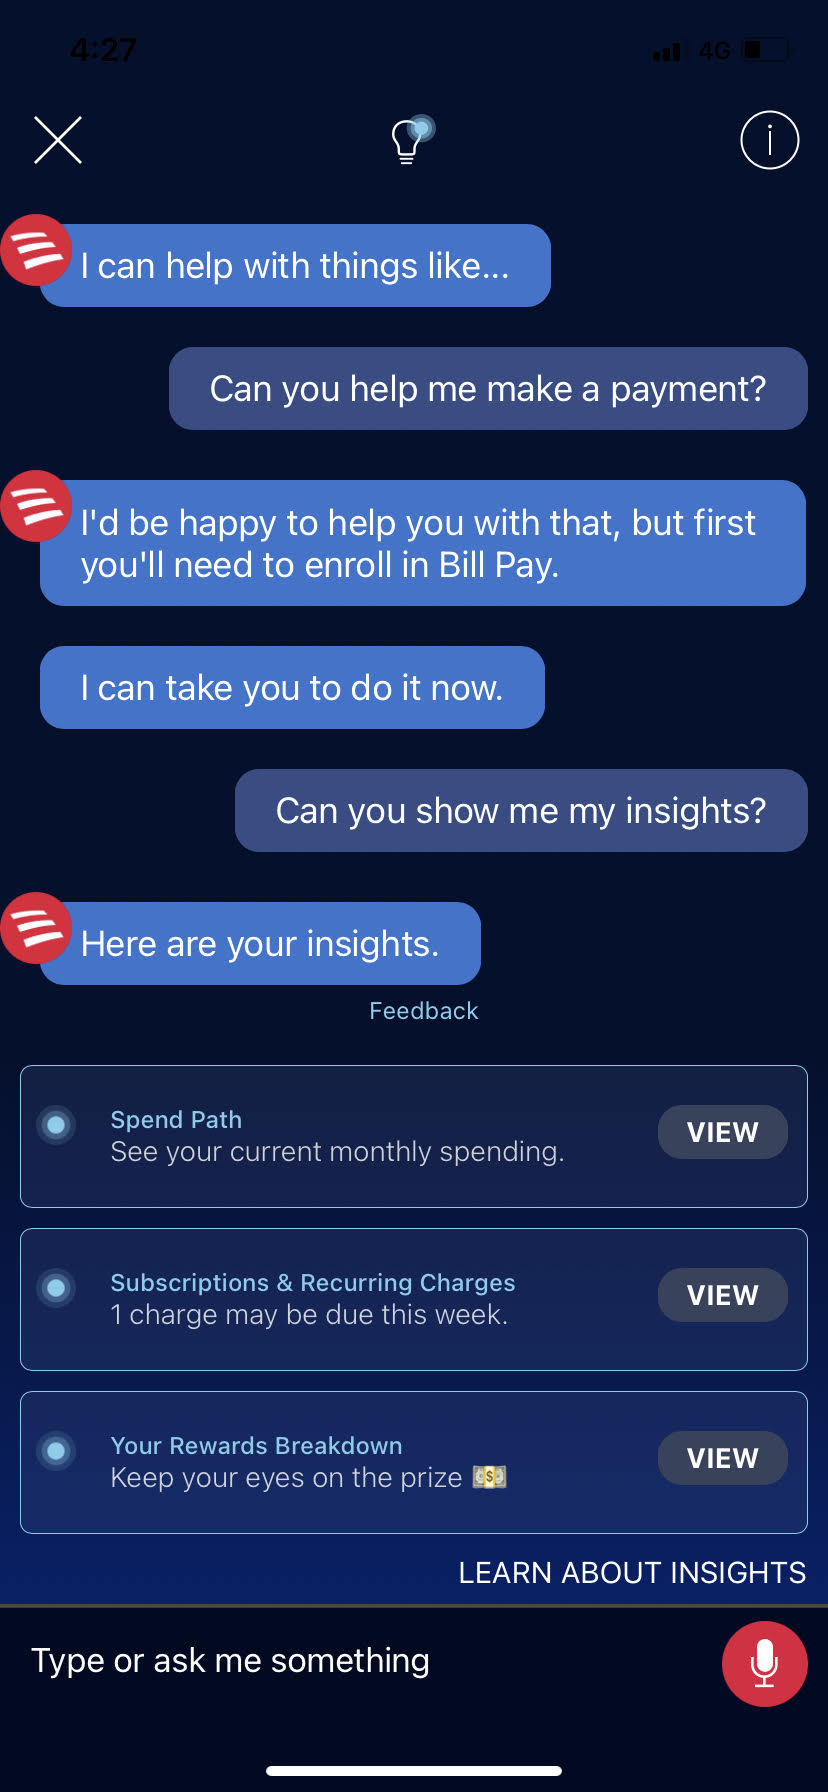 Bank of America’s “Erica” chatbot provides answers after recognizing certain keywords.